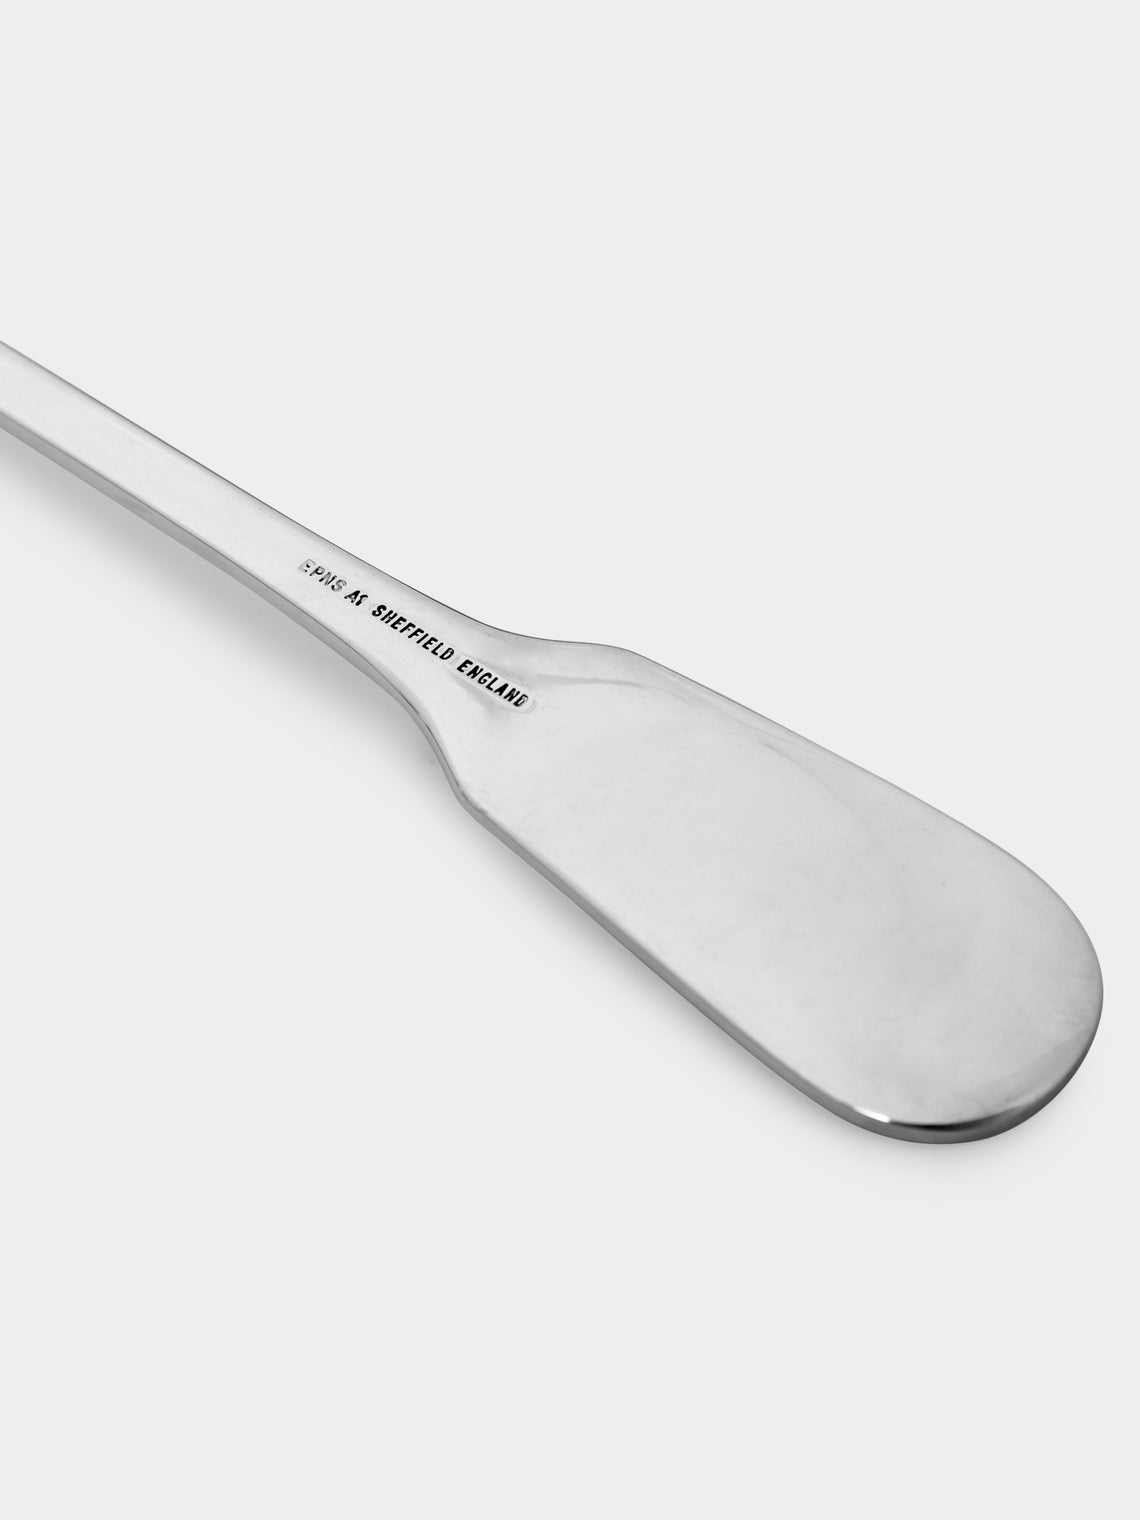 Emilia Wickstead - Florence Silver-Plated Table Spoon -  - ABASK